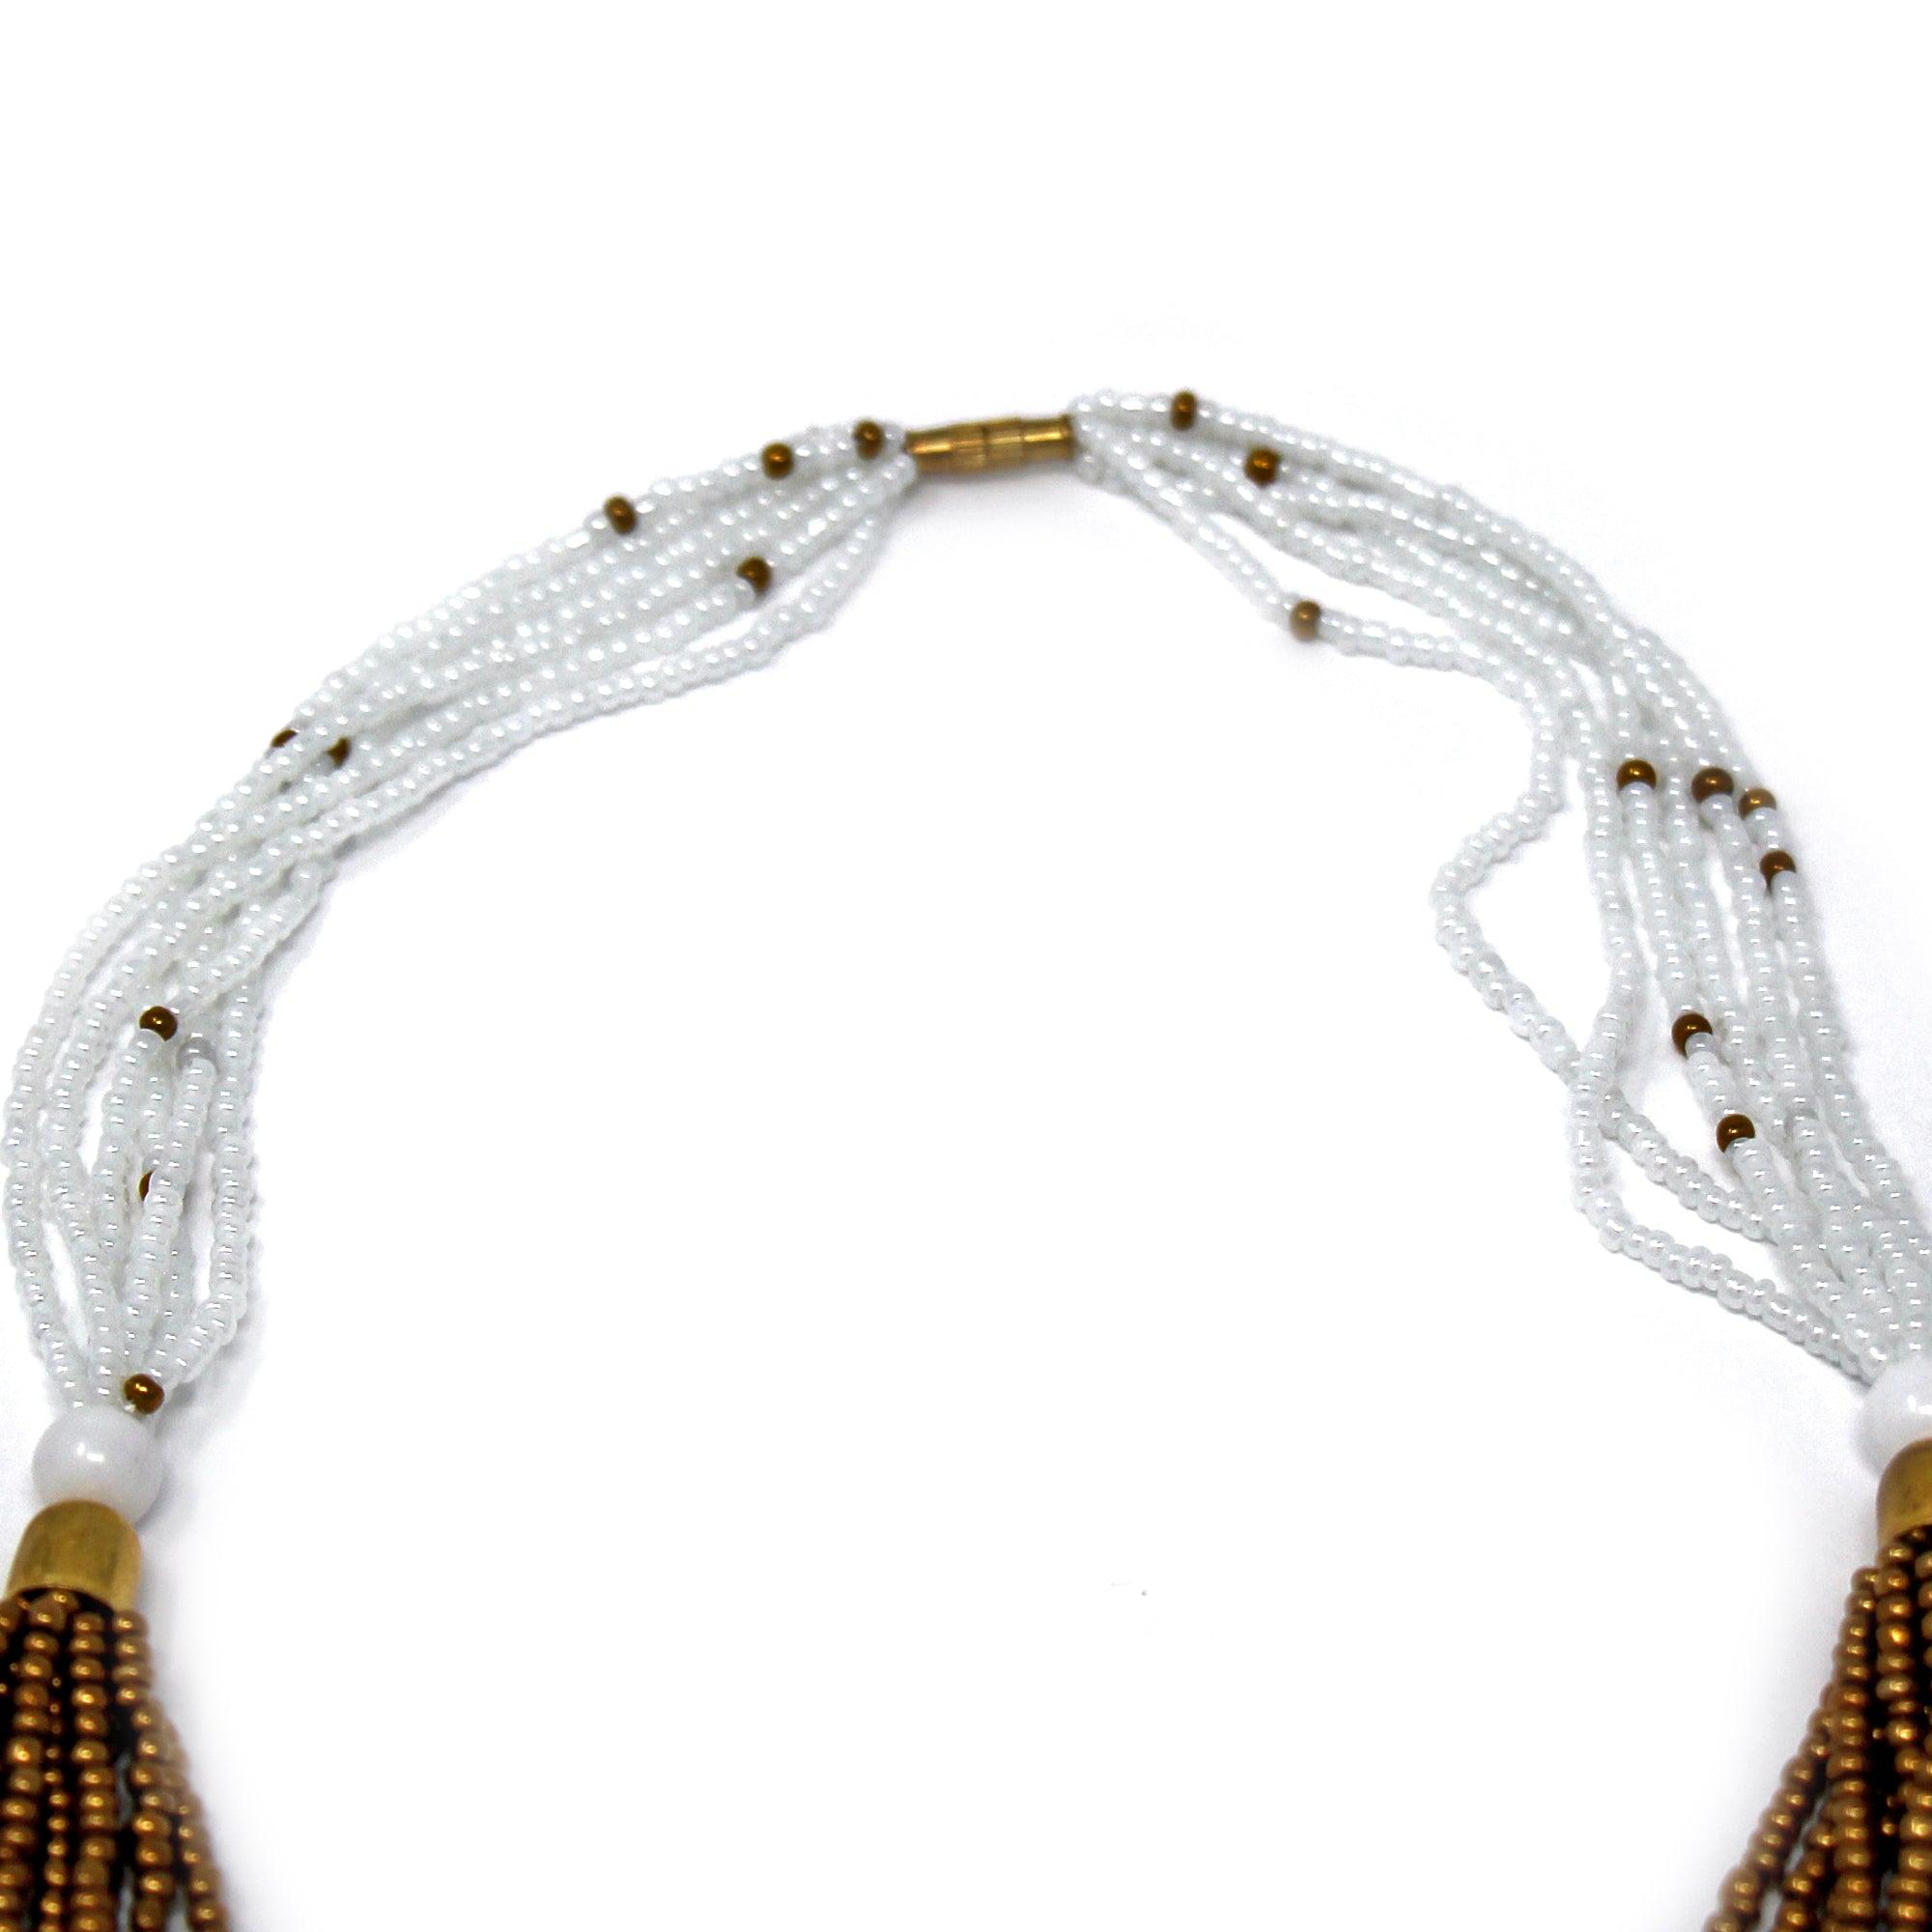 Multistrand Maasai Bead Necklace, White and Gold - Flyclothing LLC